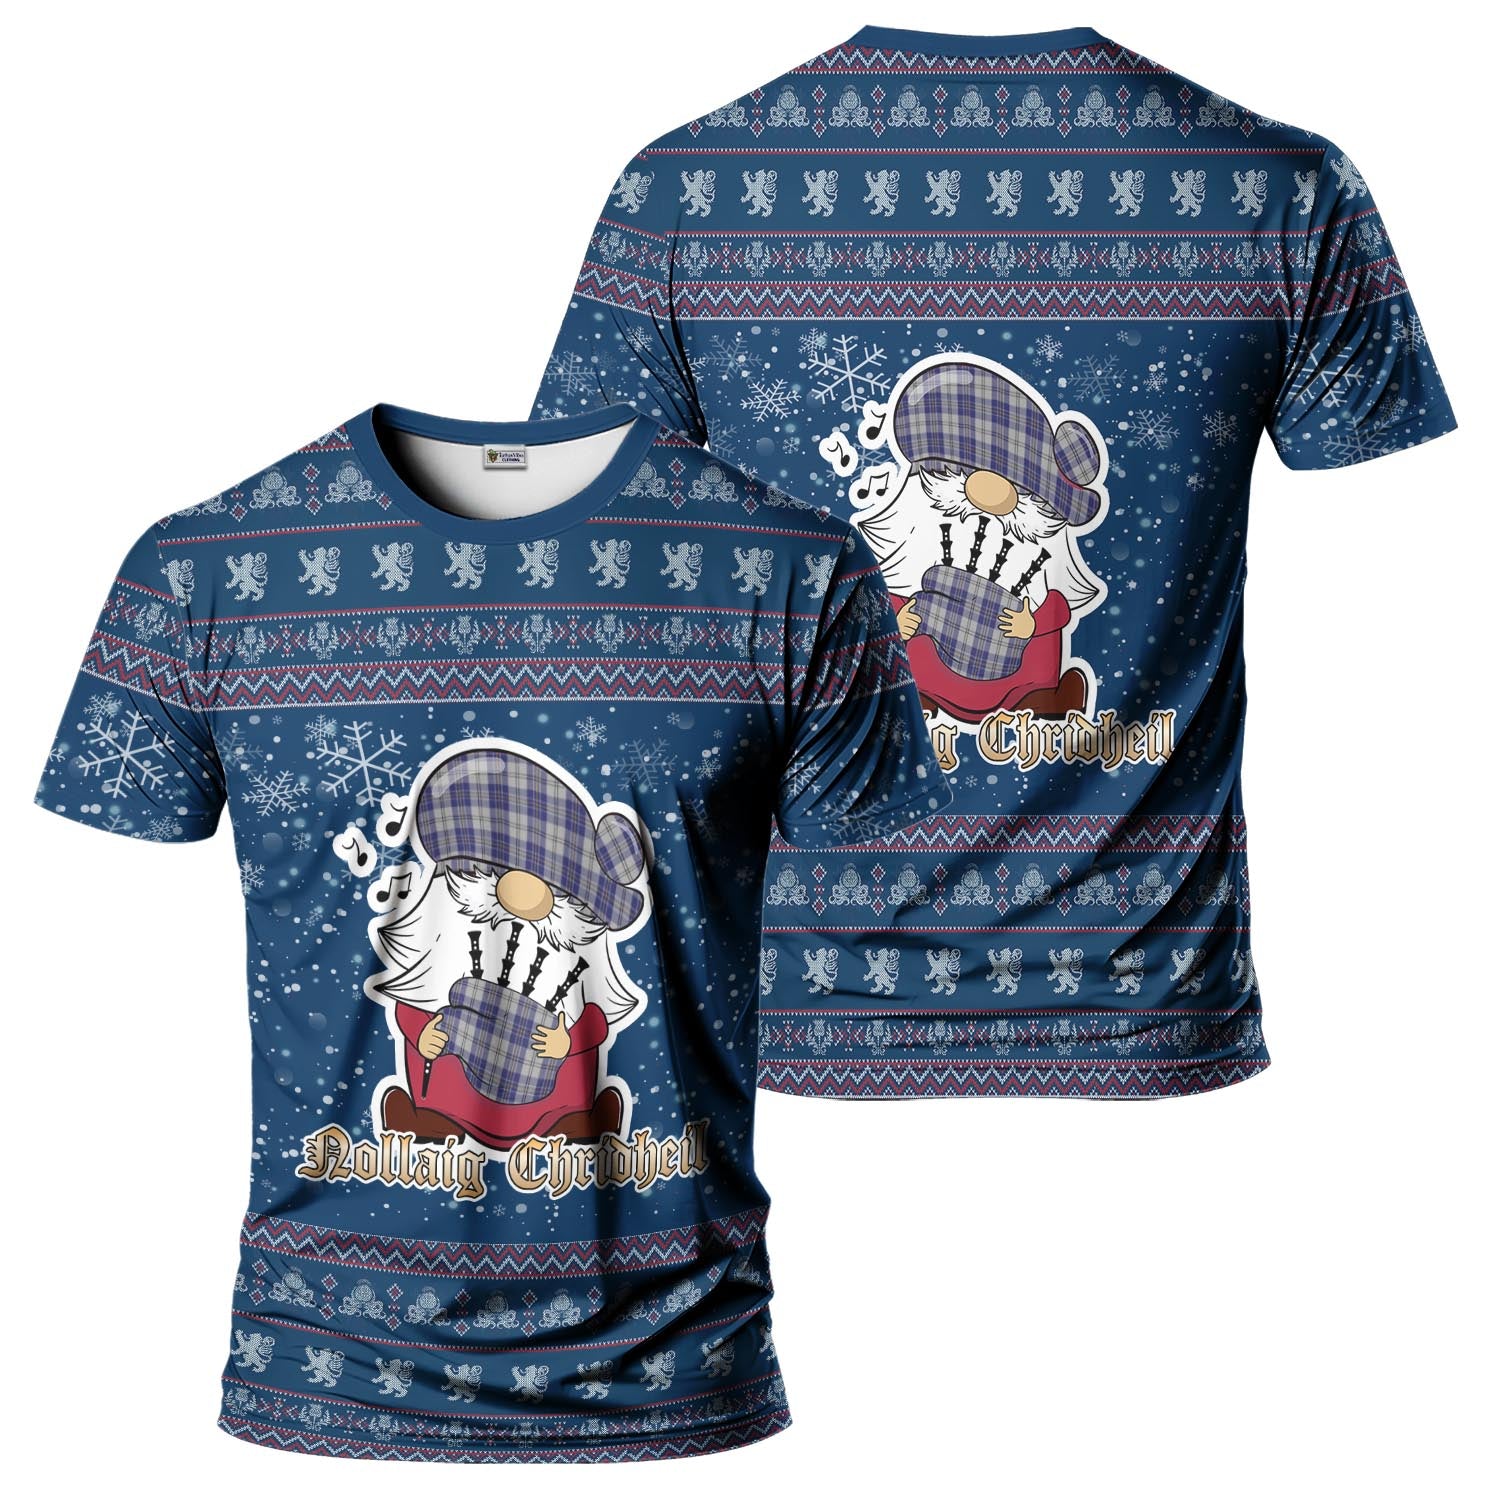 MacPherson Dress Blue Clan Christmas Family T-Shirt with Funny Gnome Playing Bagpipes Kid's Shirt Blue - Tartanvibesclothing